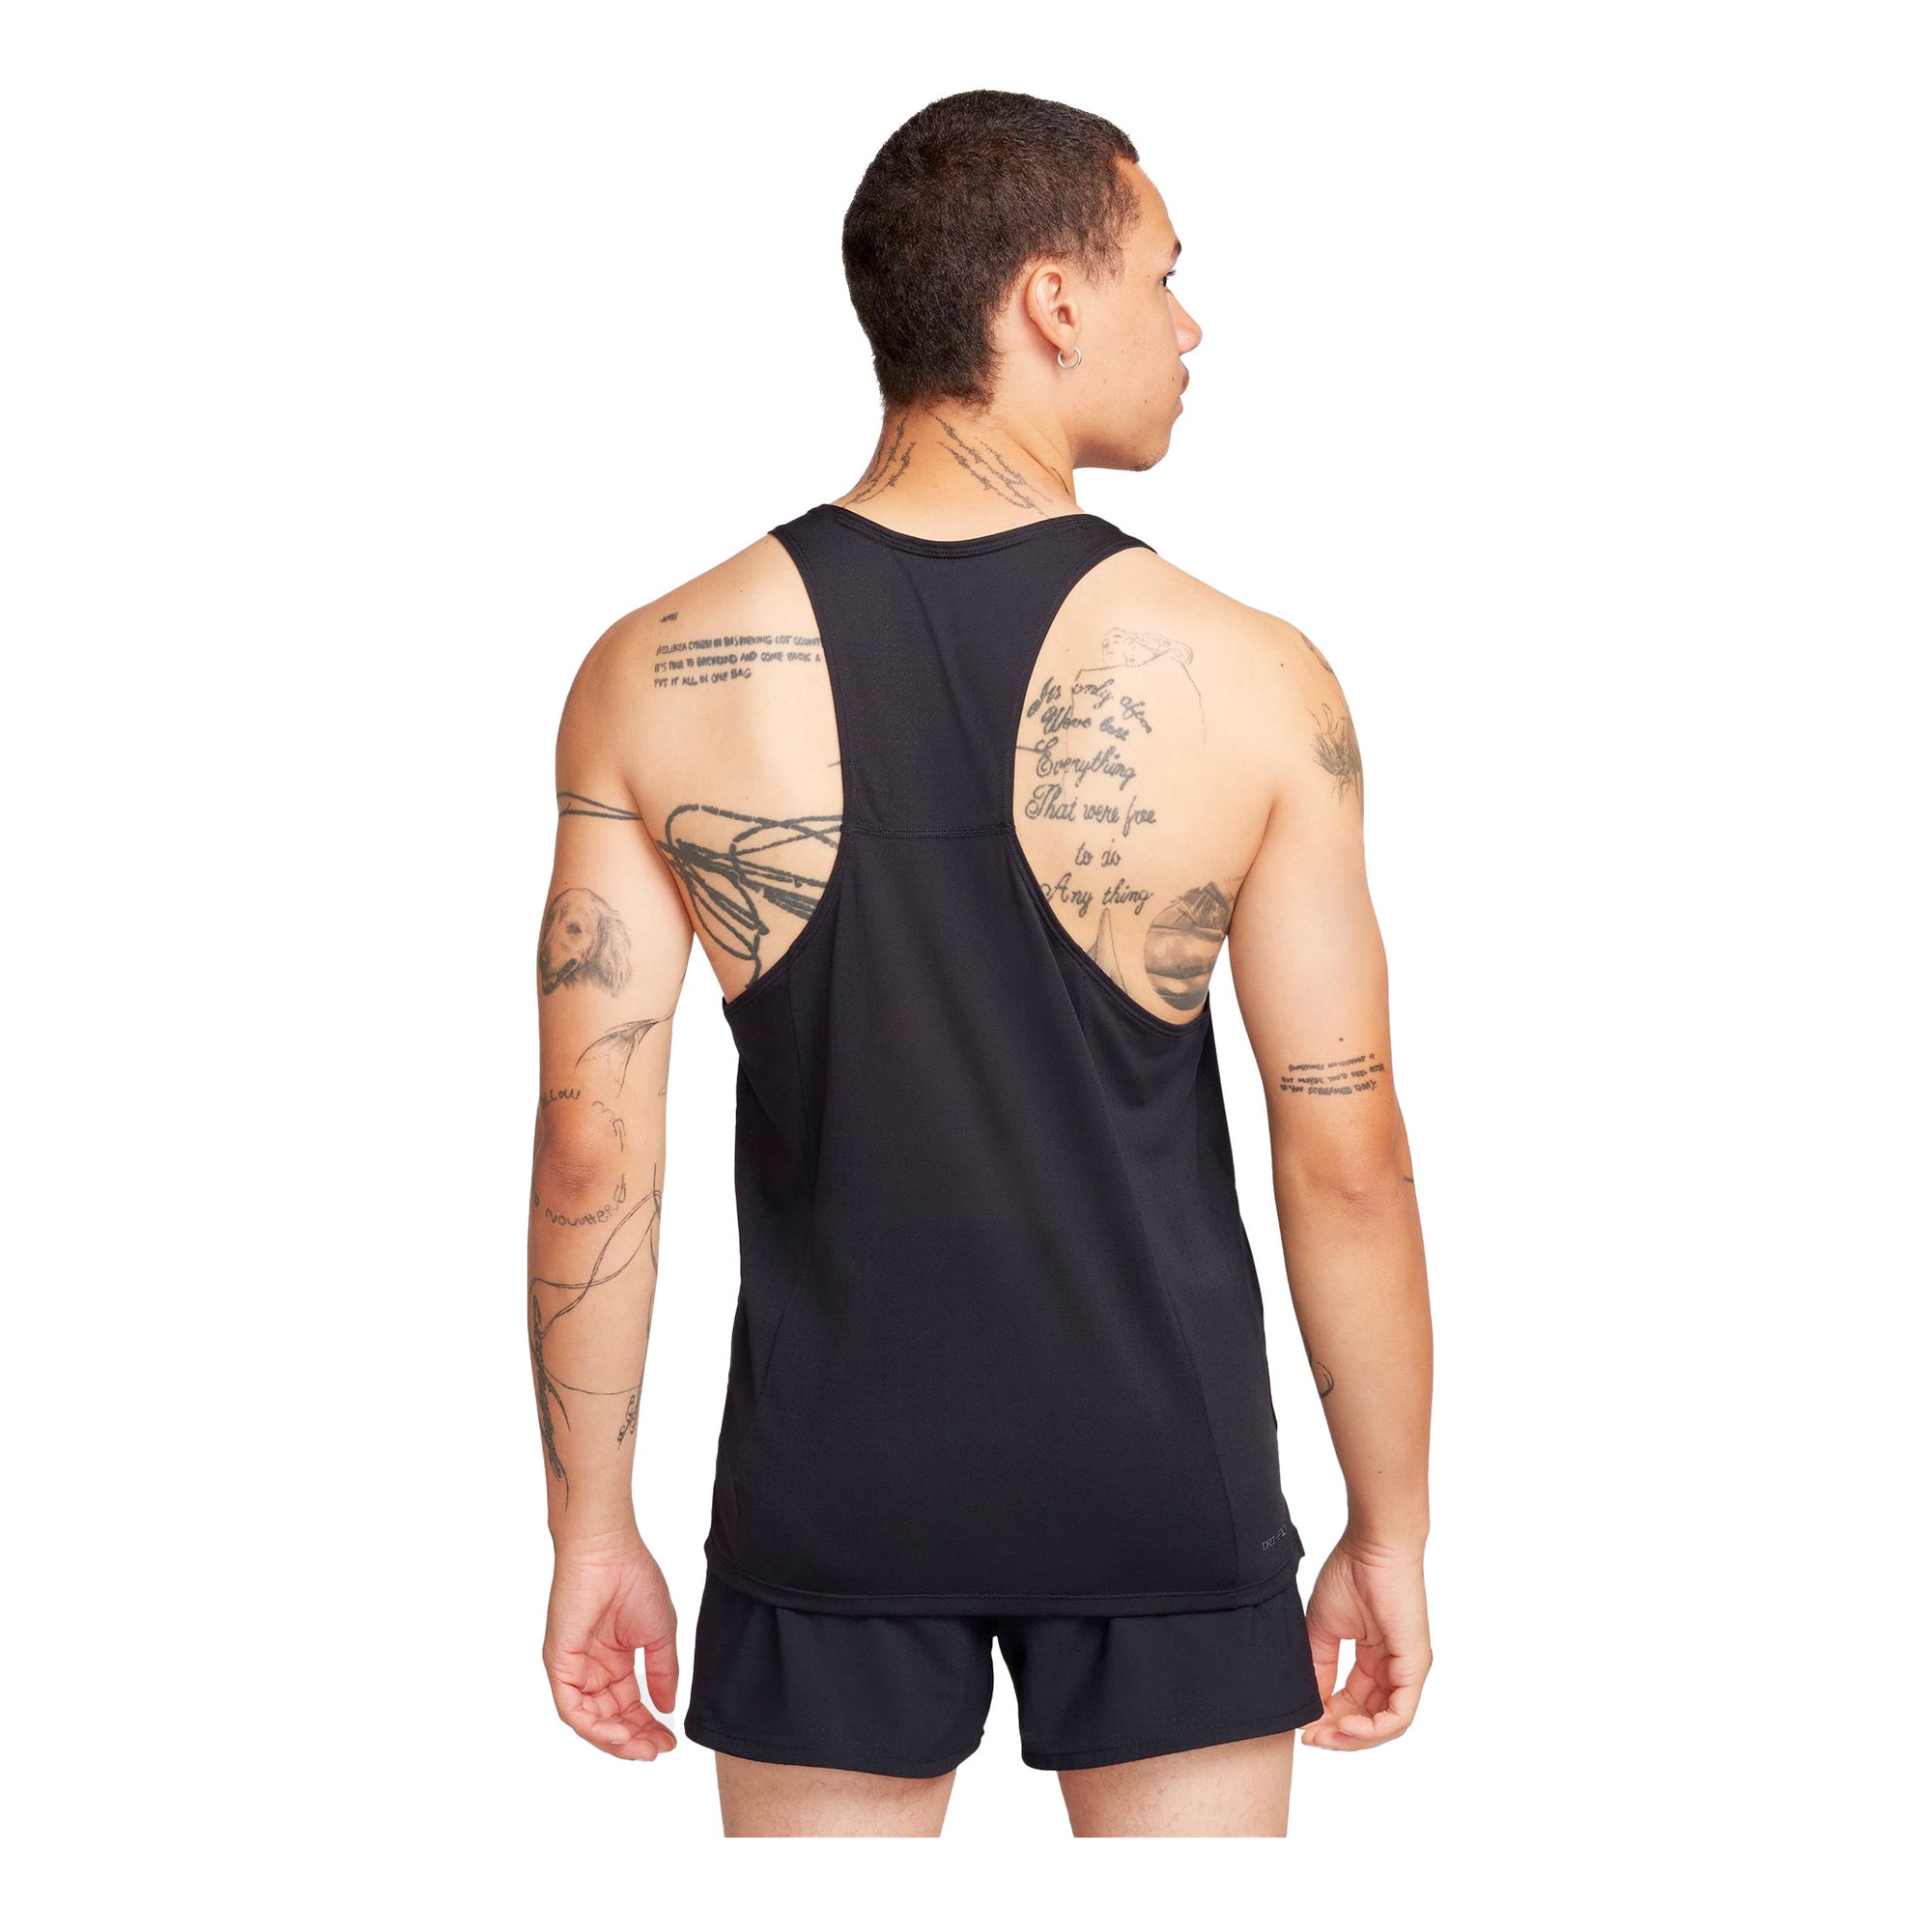 NIKE CAMISOLE DRI-FIT FAST - HOMME